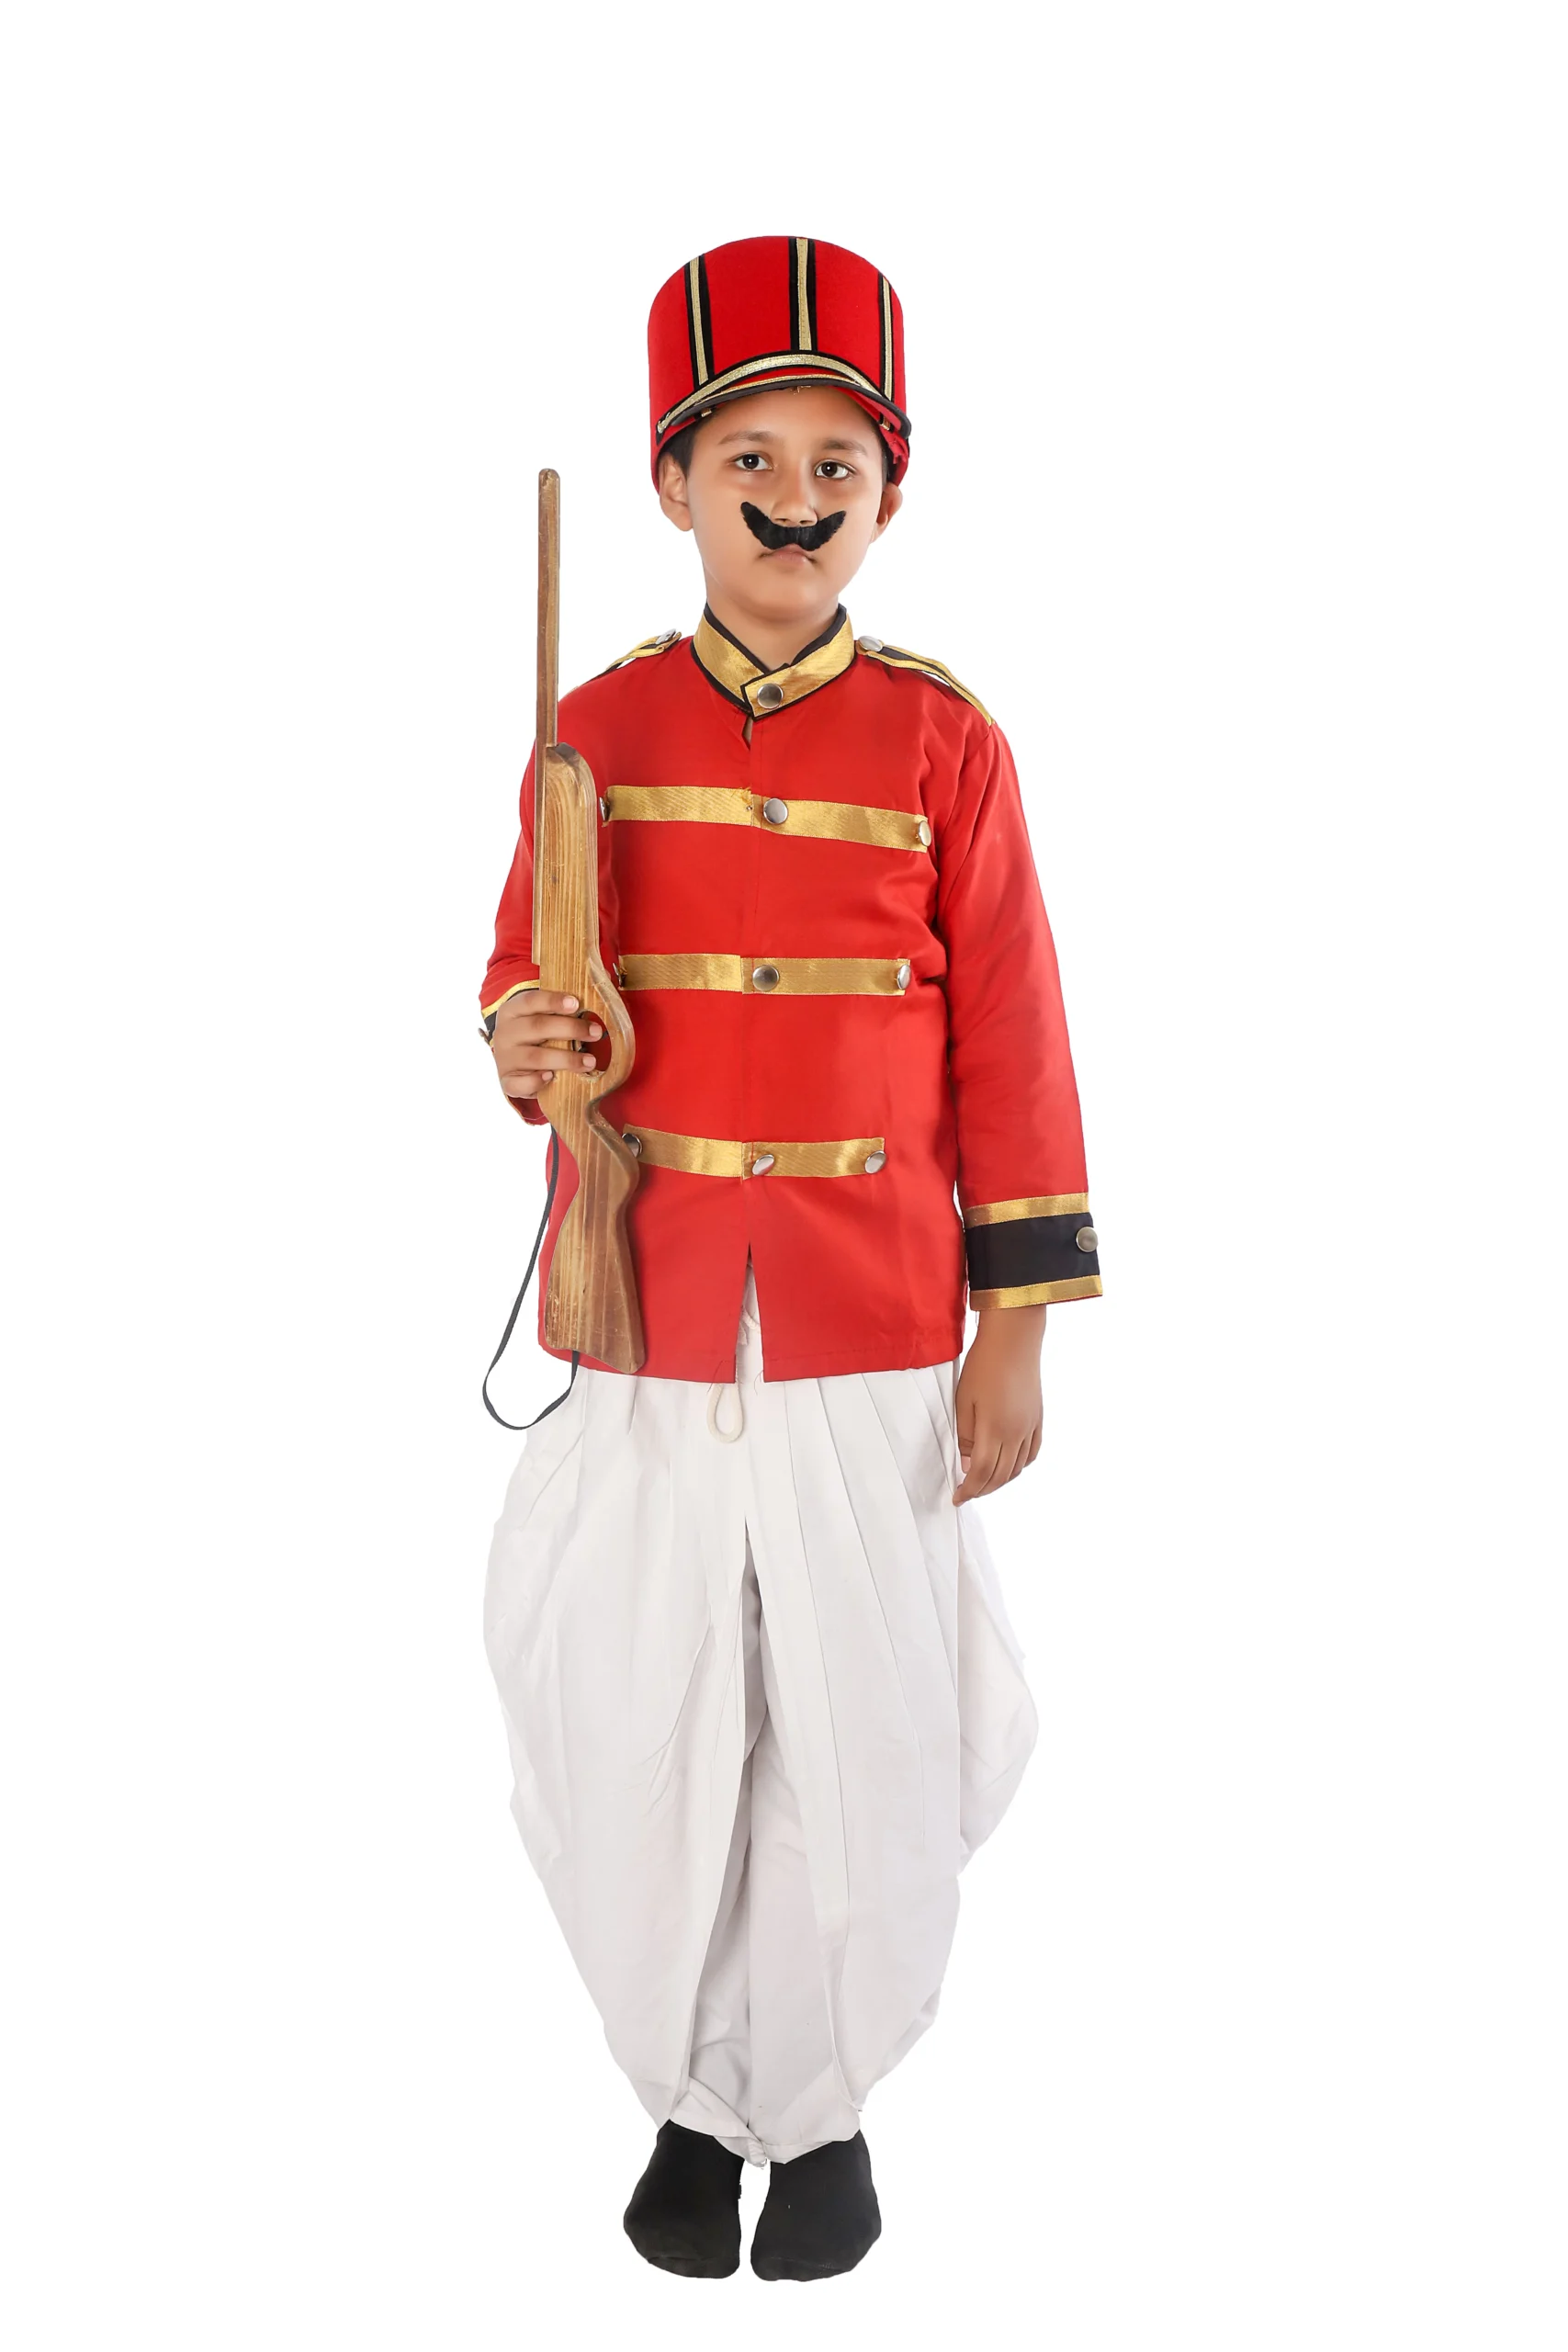 Community Helpers theme dress for fancy dress competitions for kids –  fancydresswale.com